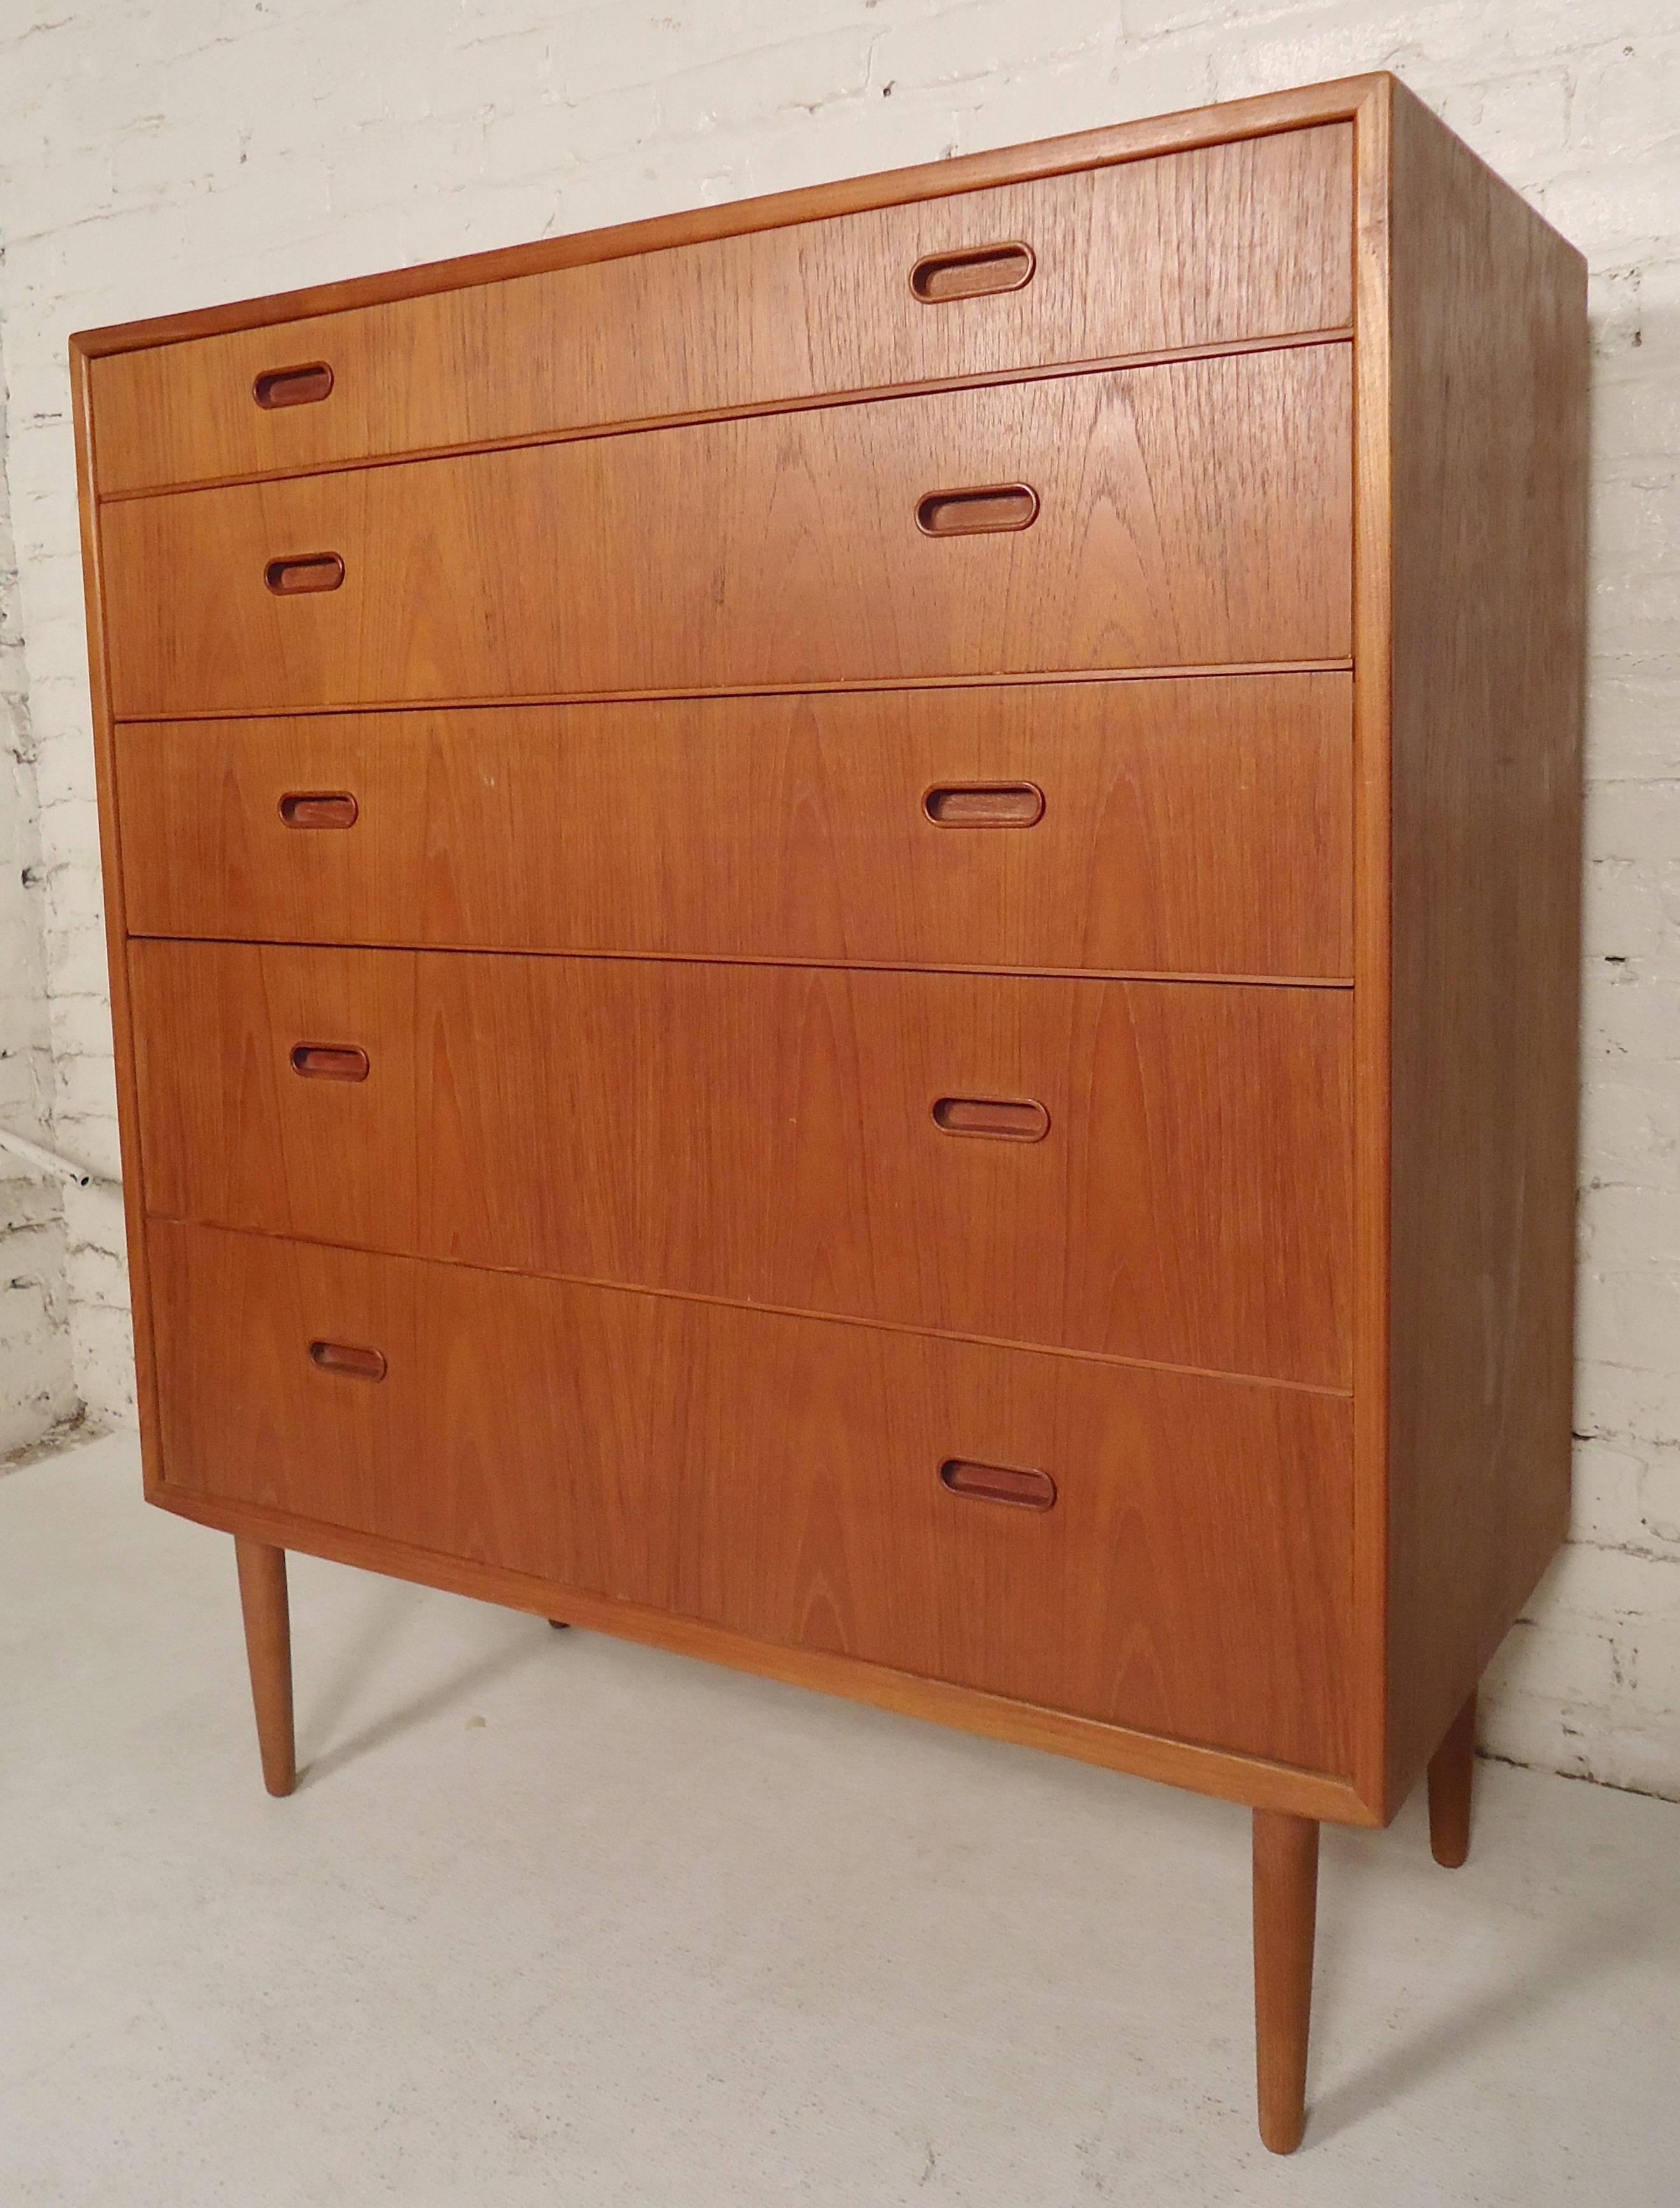 Five-drawer teak dresser with inset handles and tapered legs.

(Please confirm item location - NY or NJ - with dealer).
 